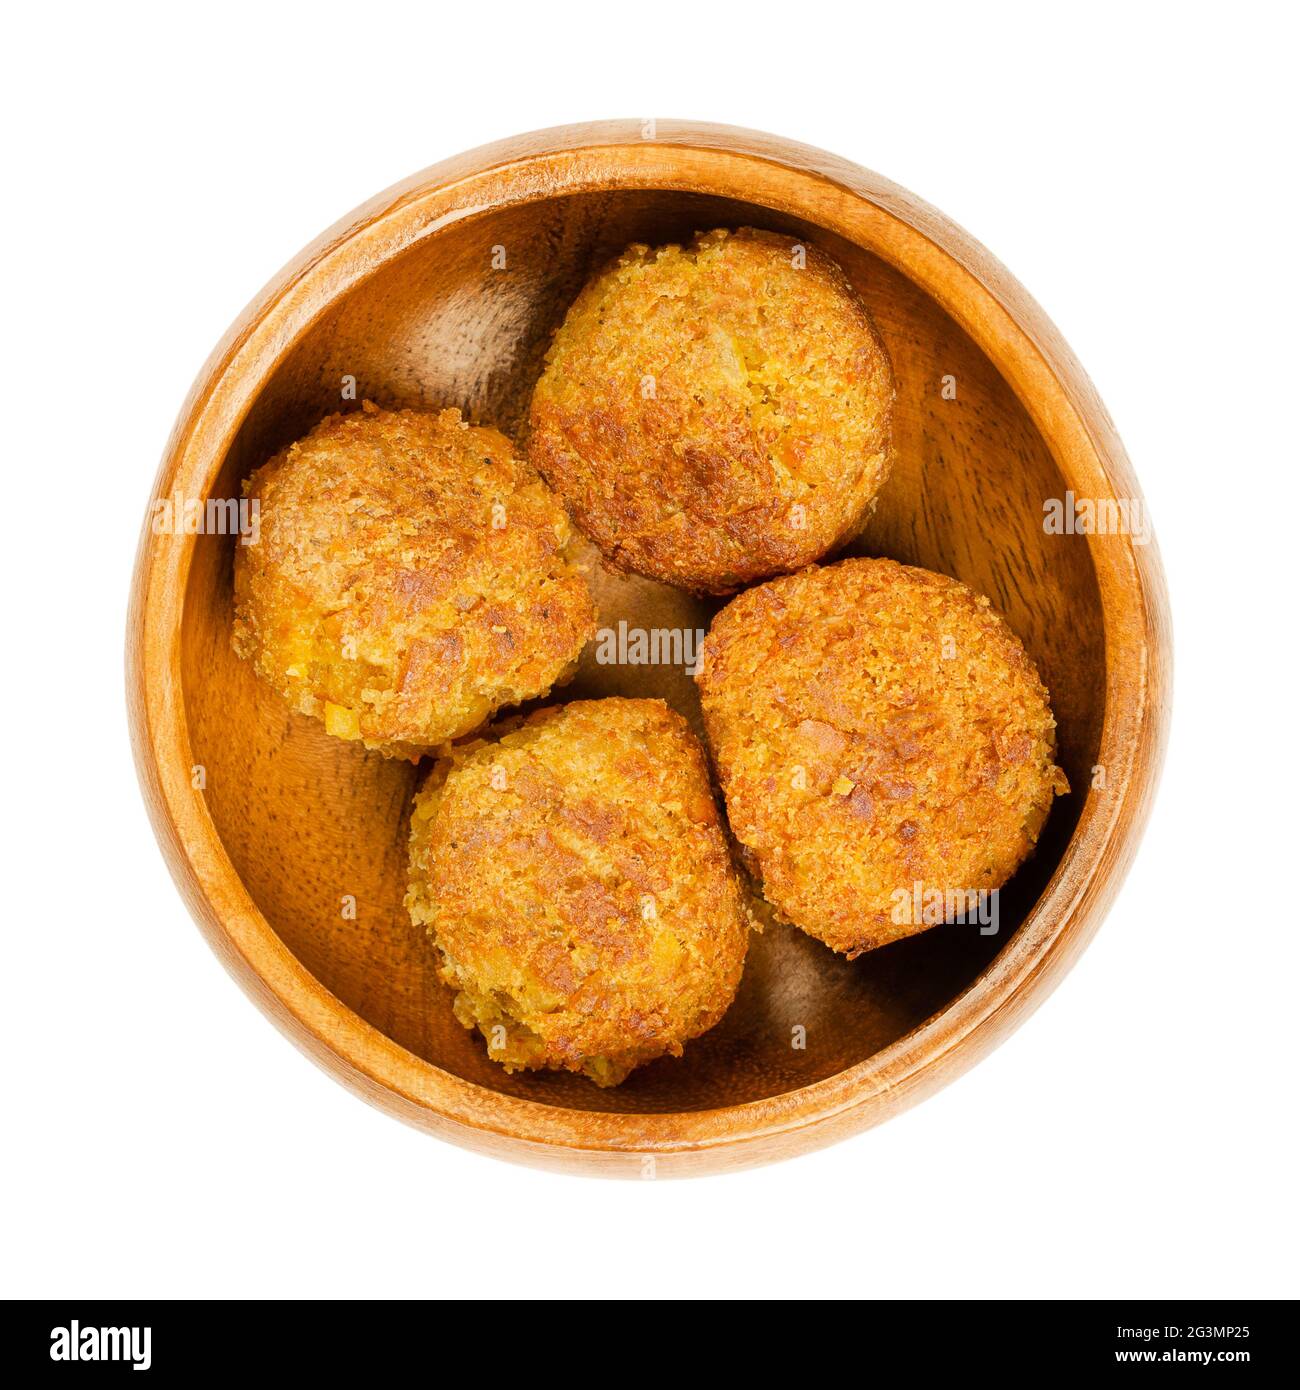 Fried vegan falafel balls, in a wooden bowl. Group of ball shaped fritters, based on chickpeas and rice, a traditional Middle Eastern food. Stock Photo